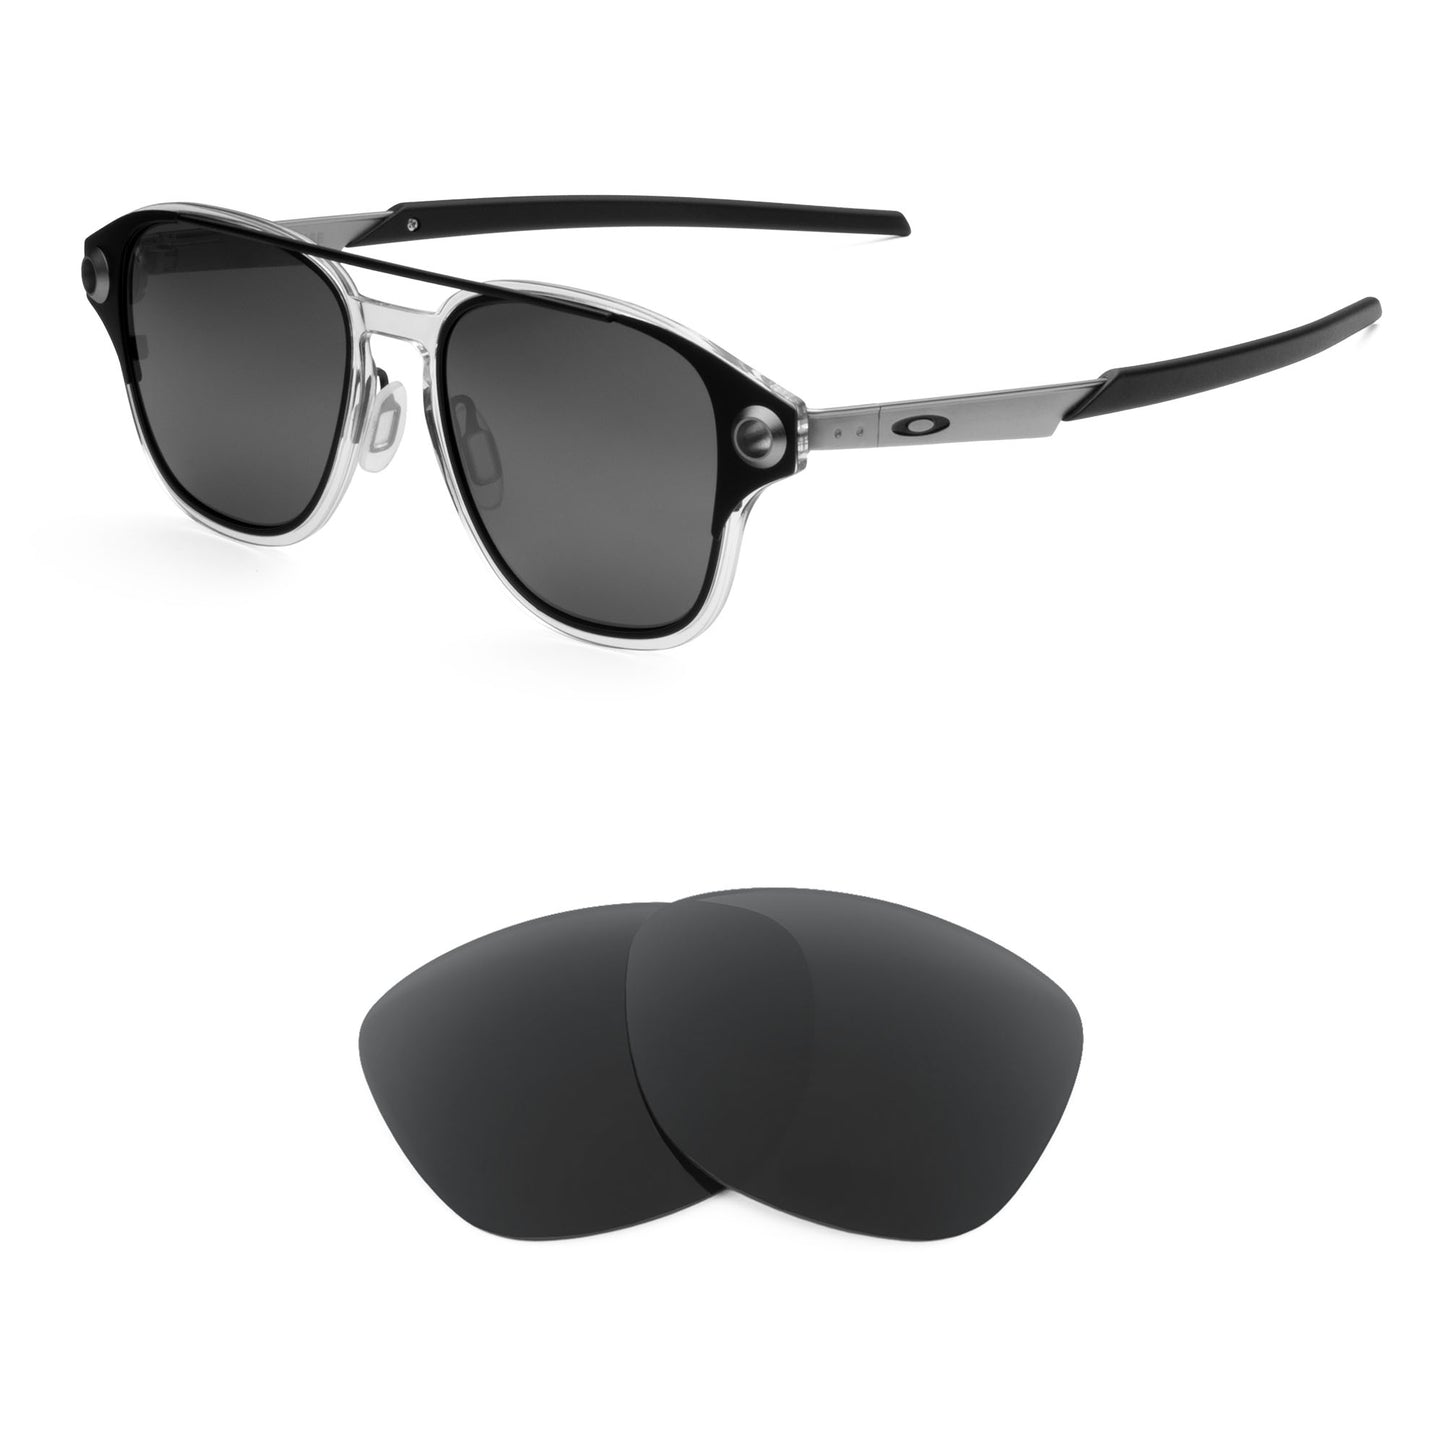 Oakley Coldfuse sunglasses with replacement lenses